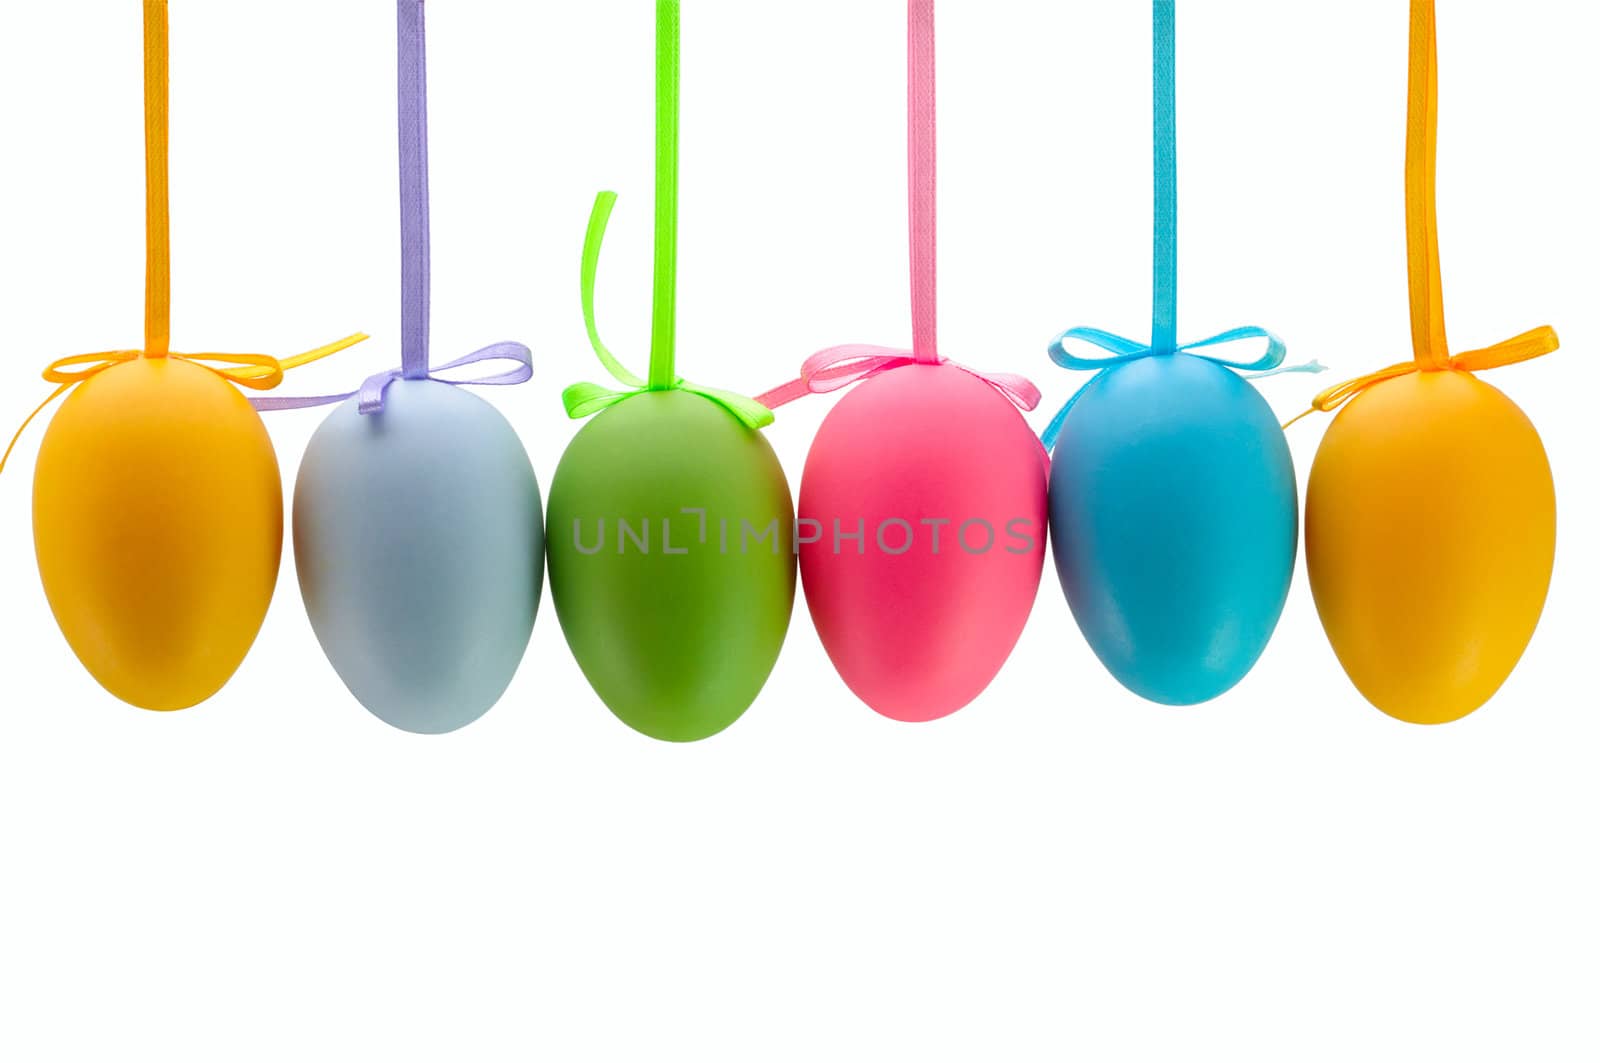 Colorful Easter eggs hanging on ribbons. Isolated.